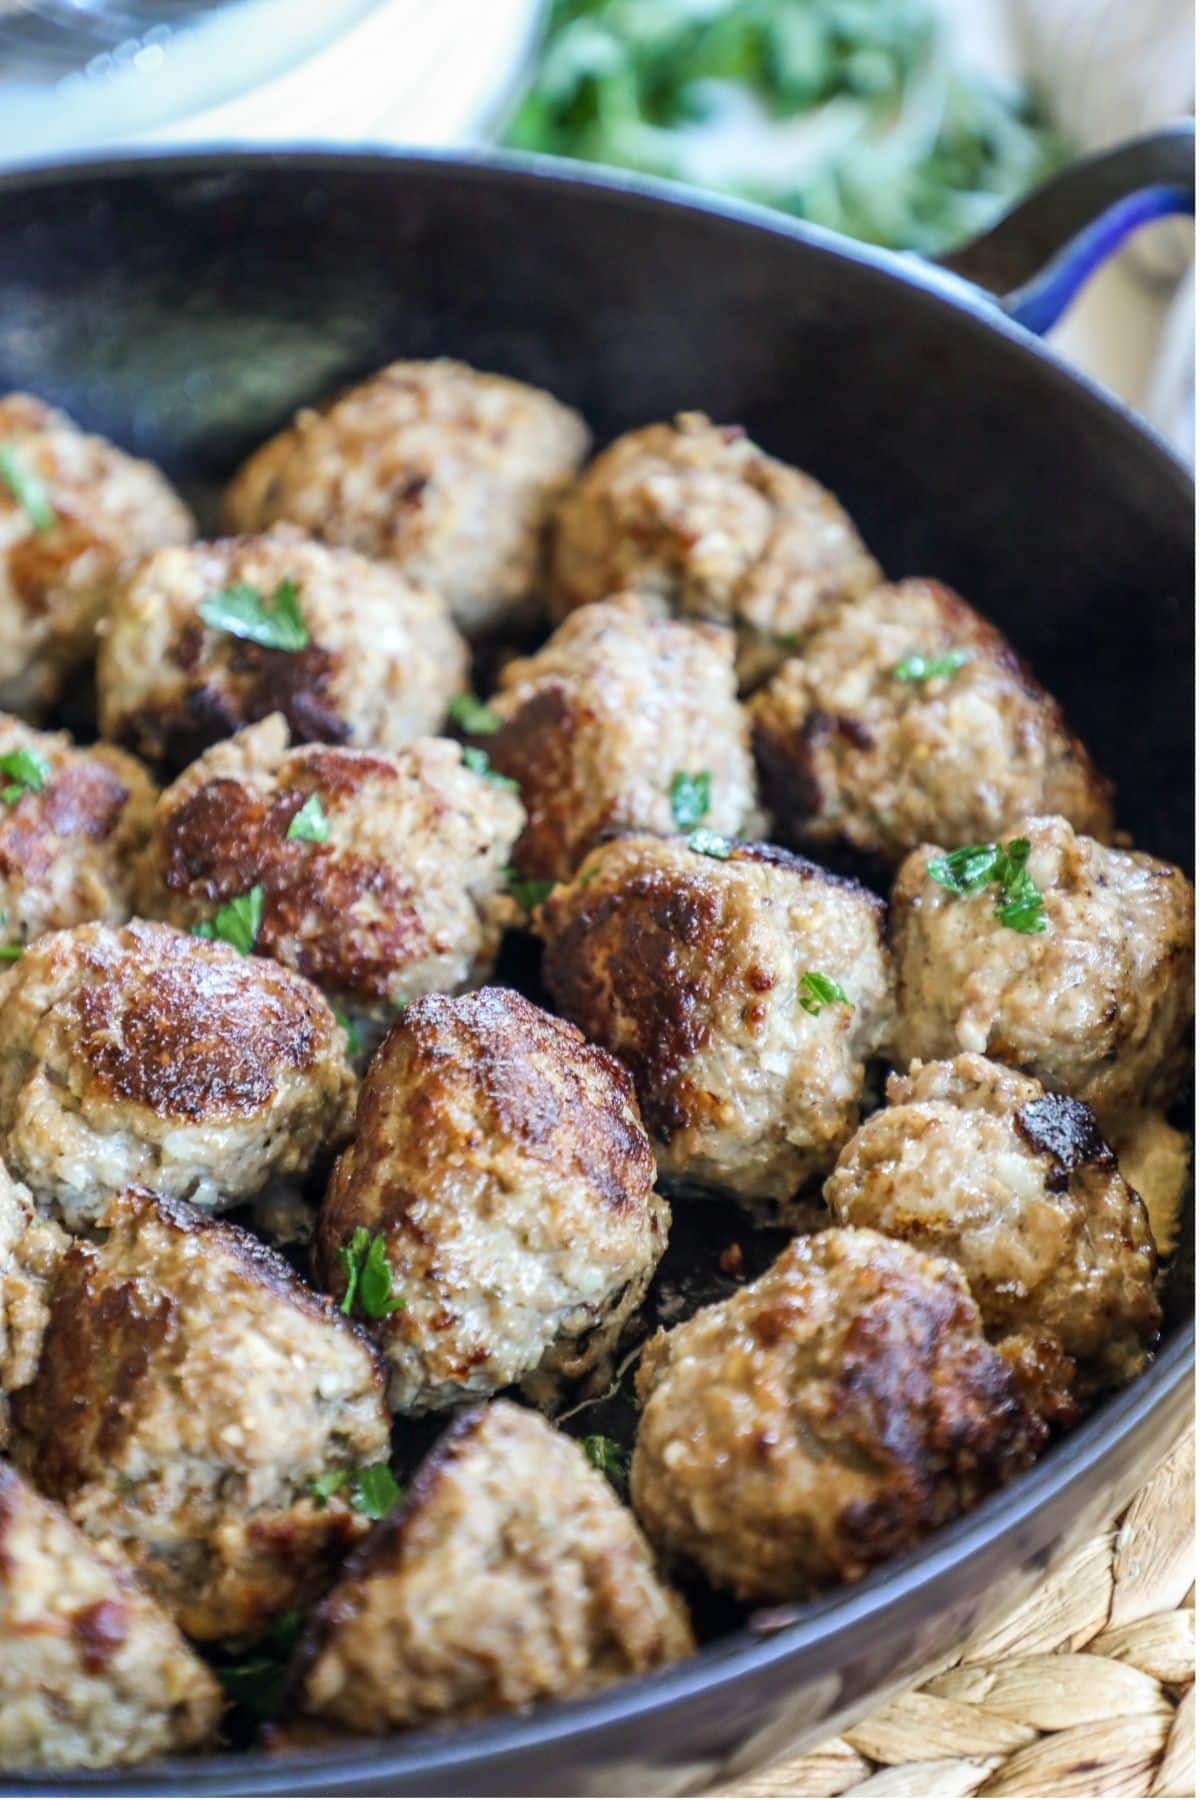 Meatballs in a cast iron skillet